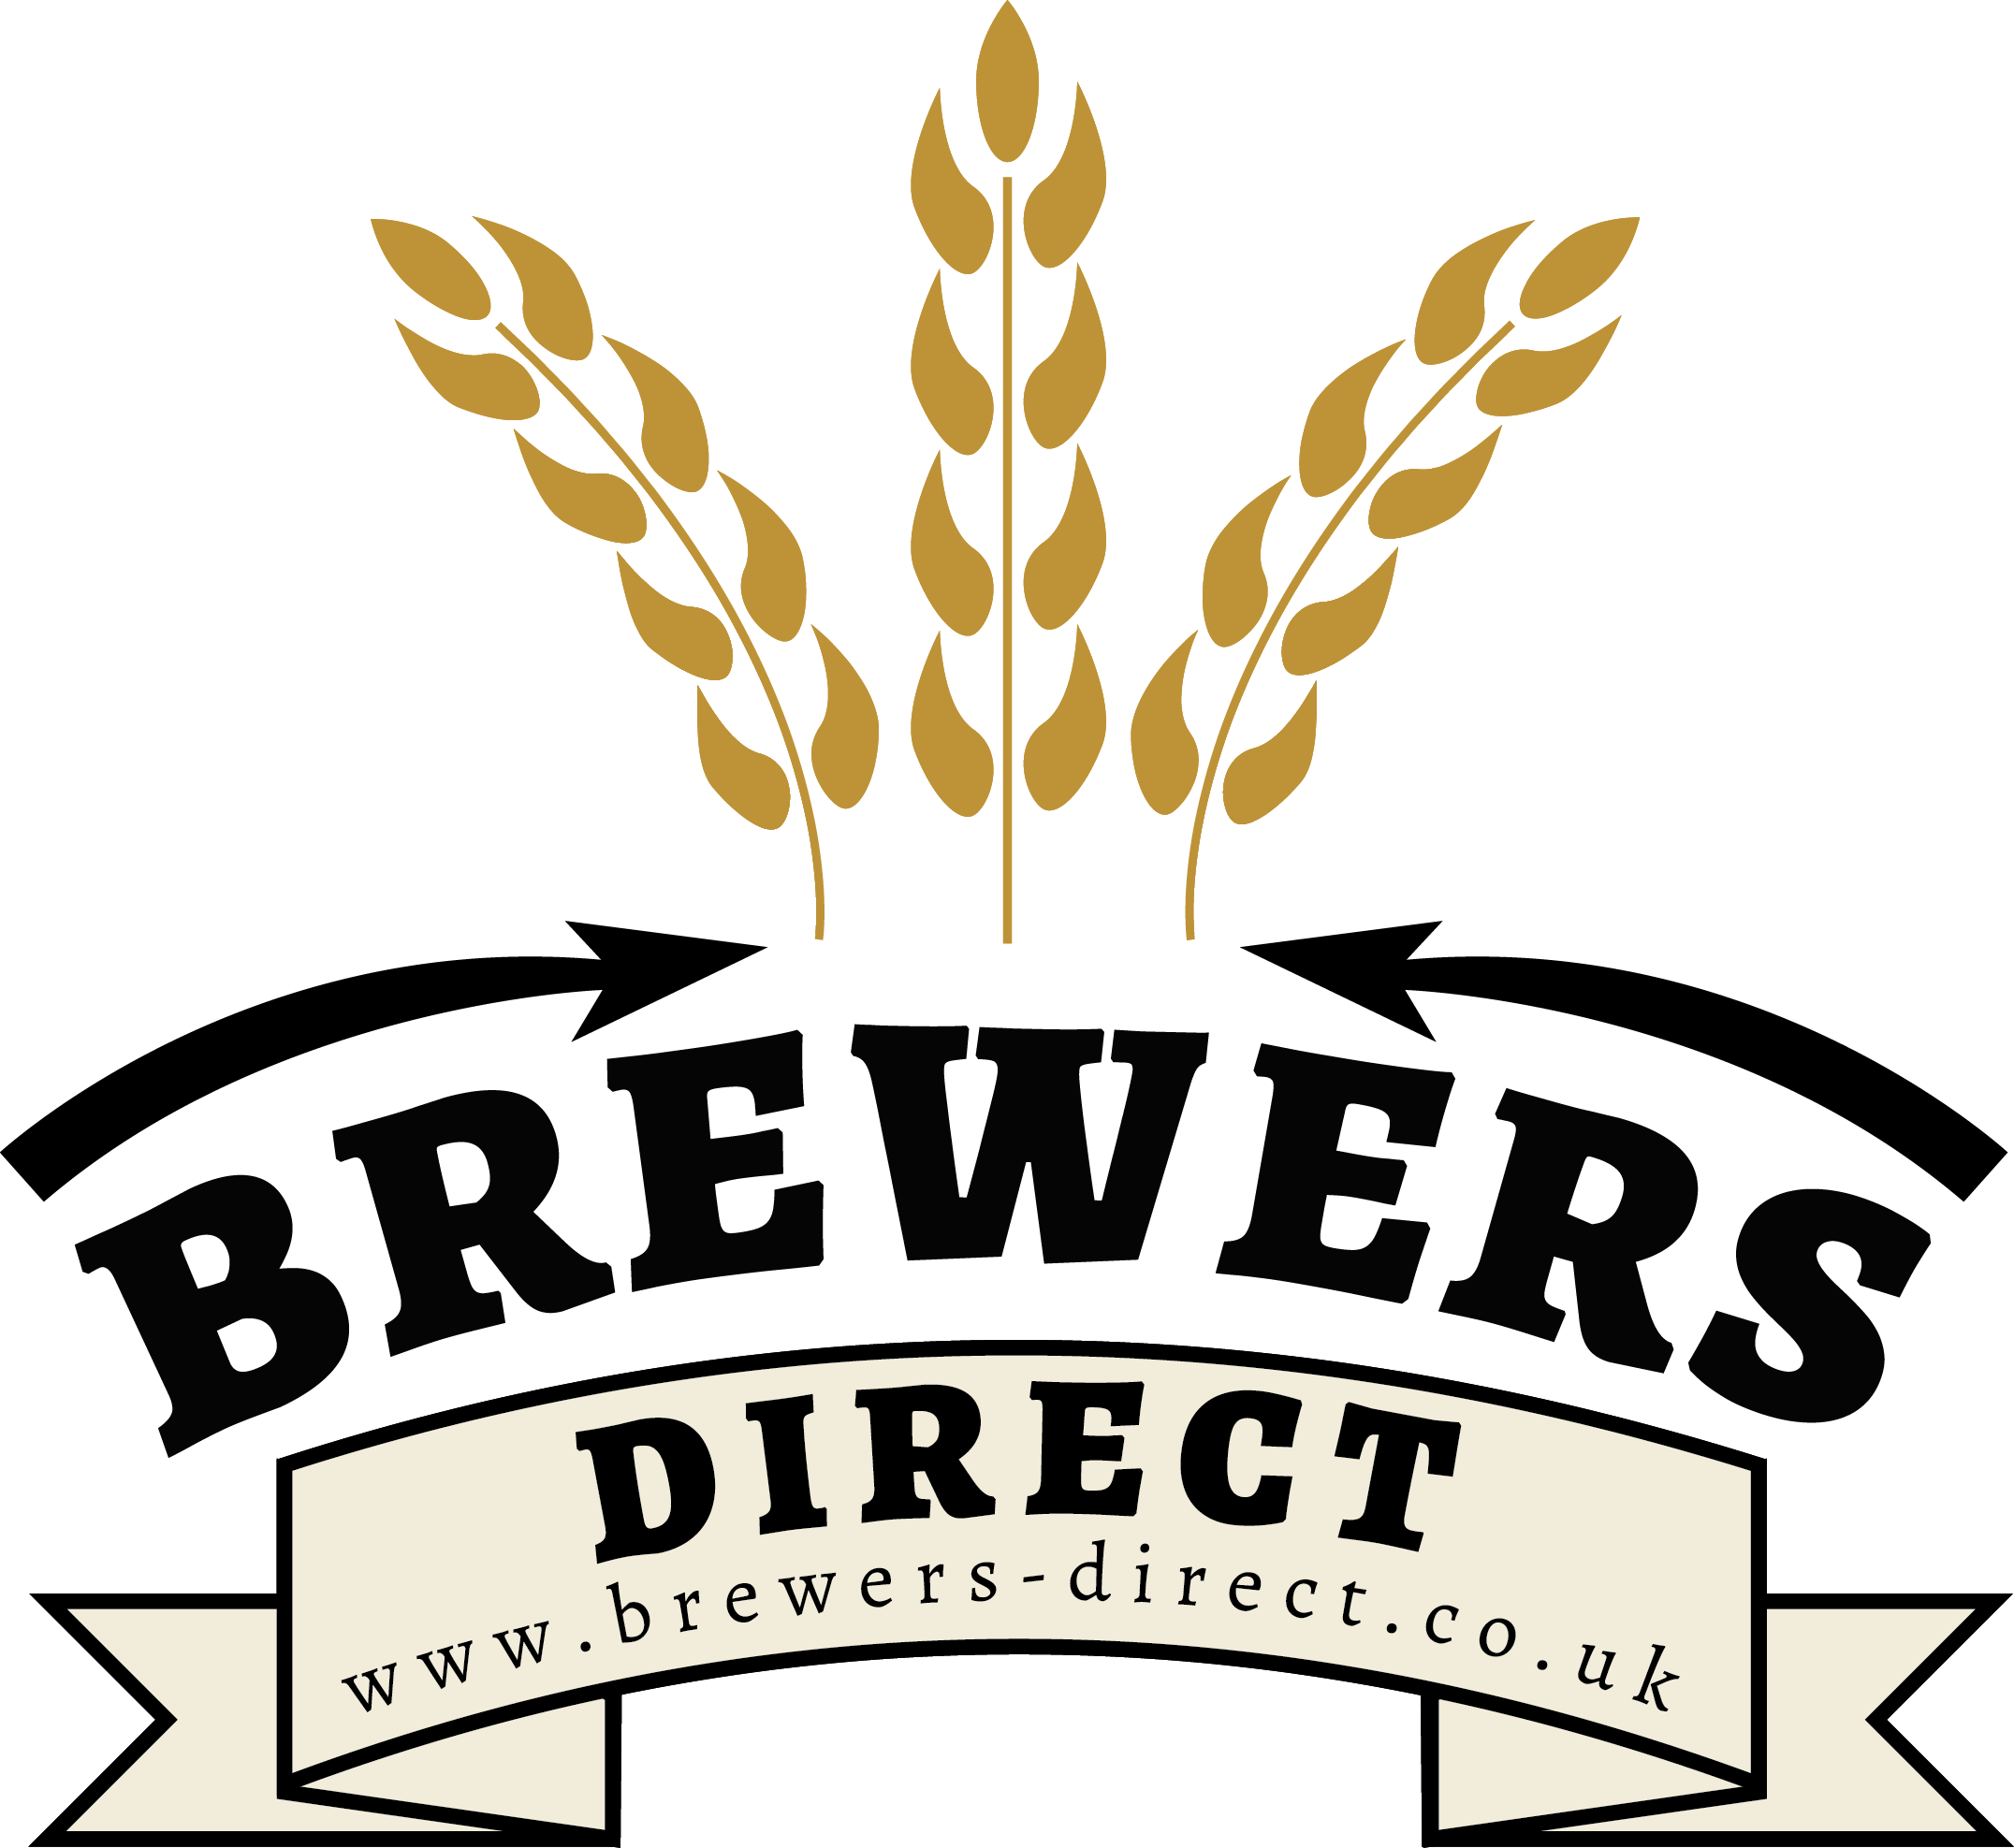 Brewers-Direct.co.uk